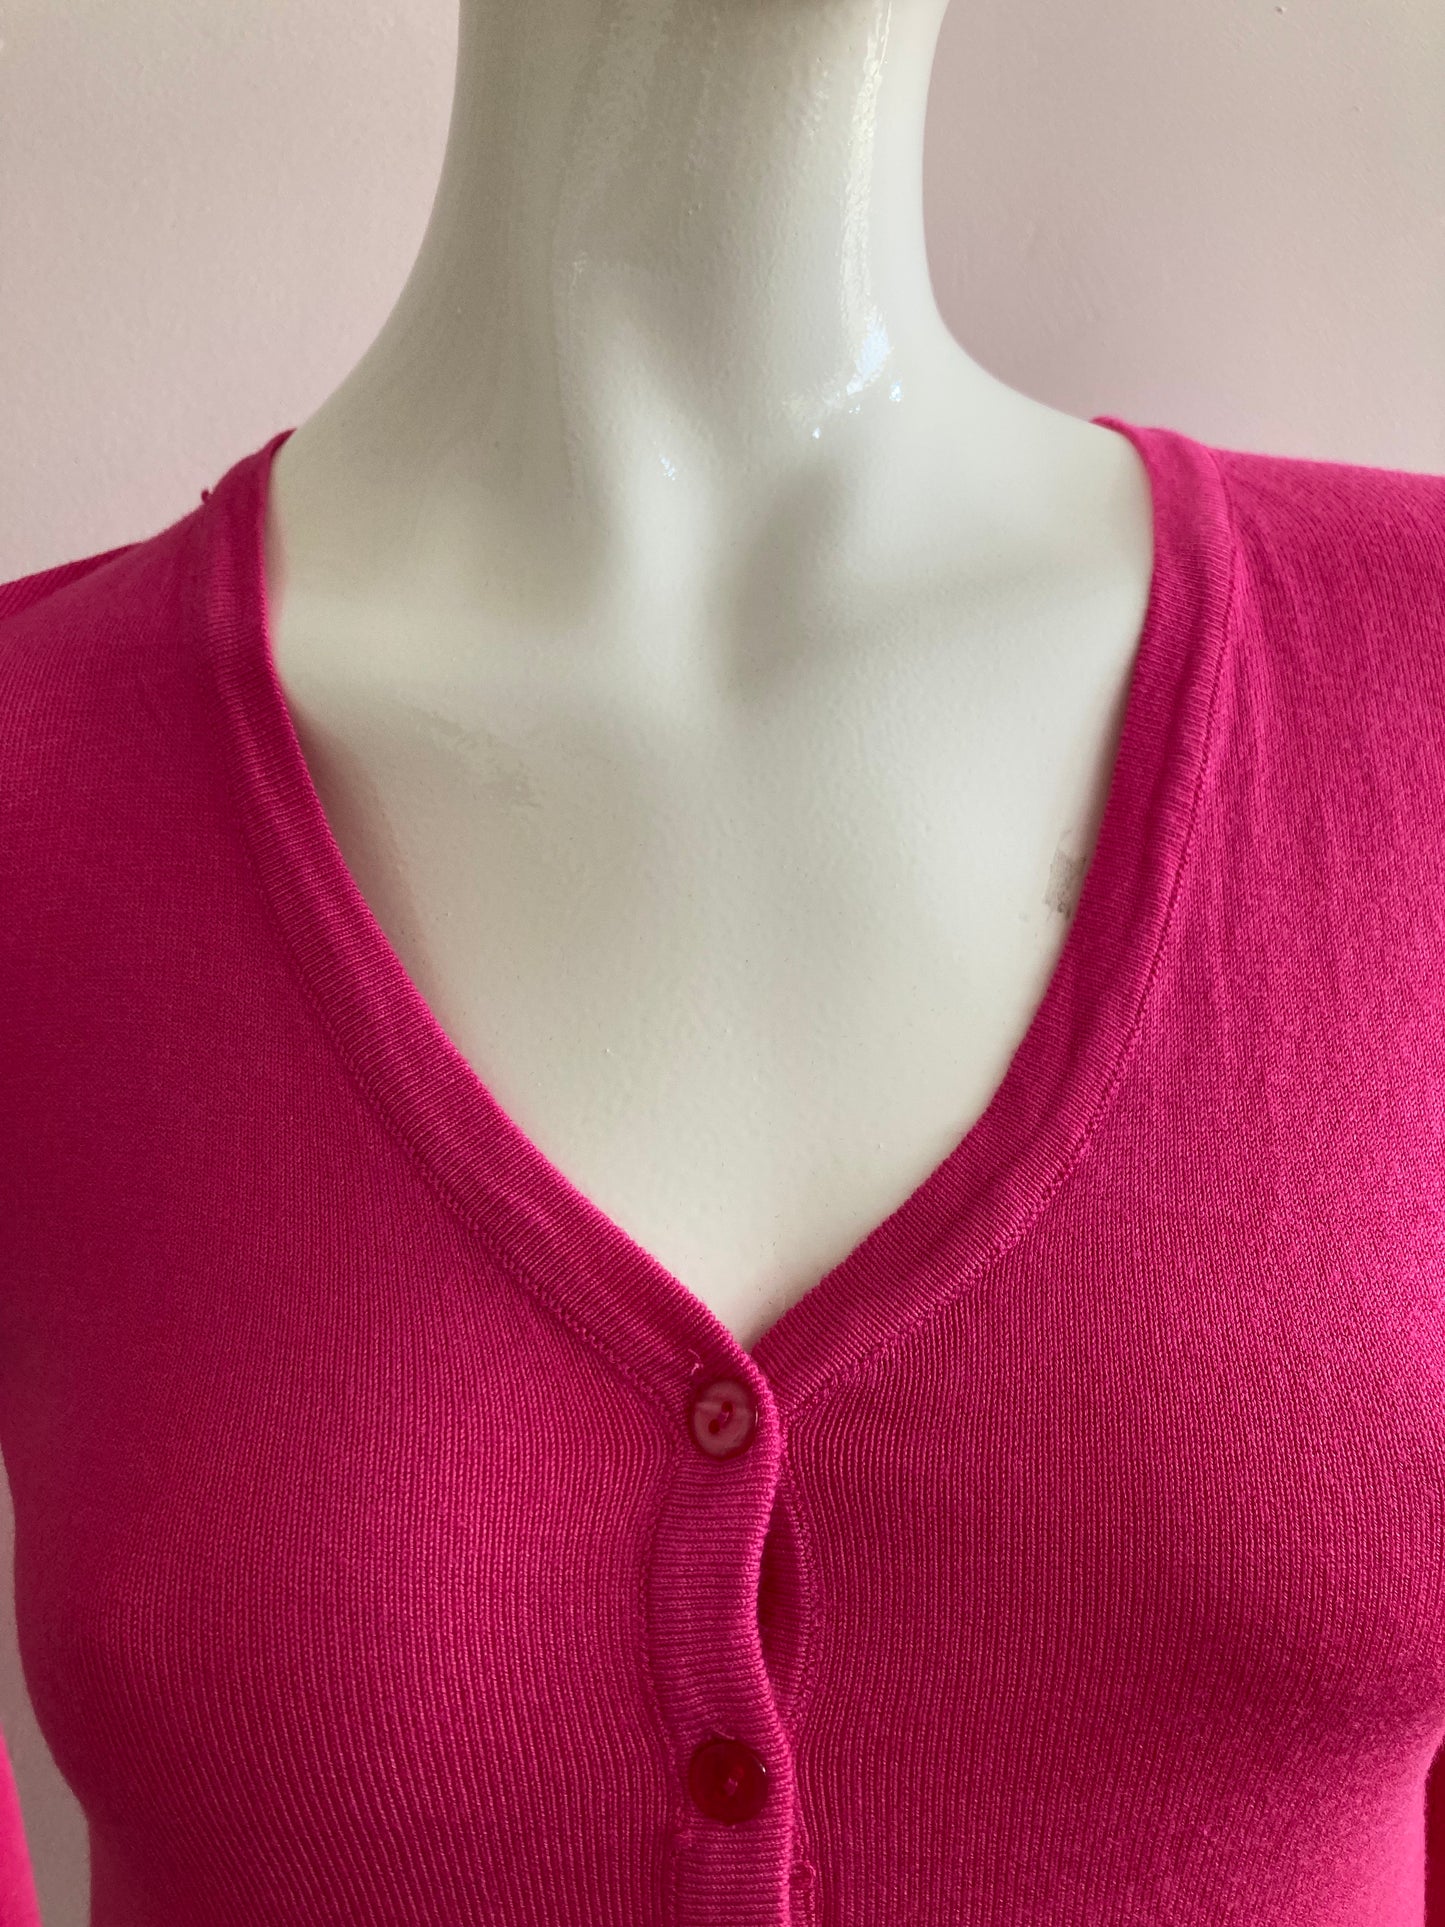 Very stretchy and very soft fuchsia knit cardigan